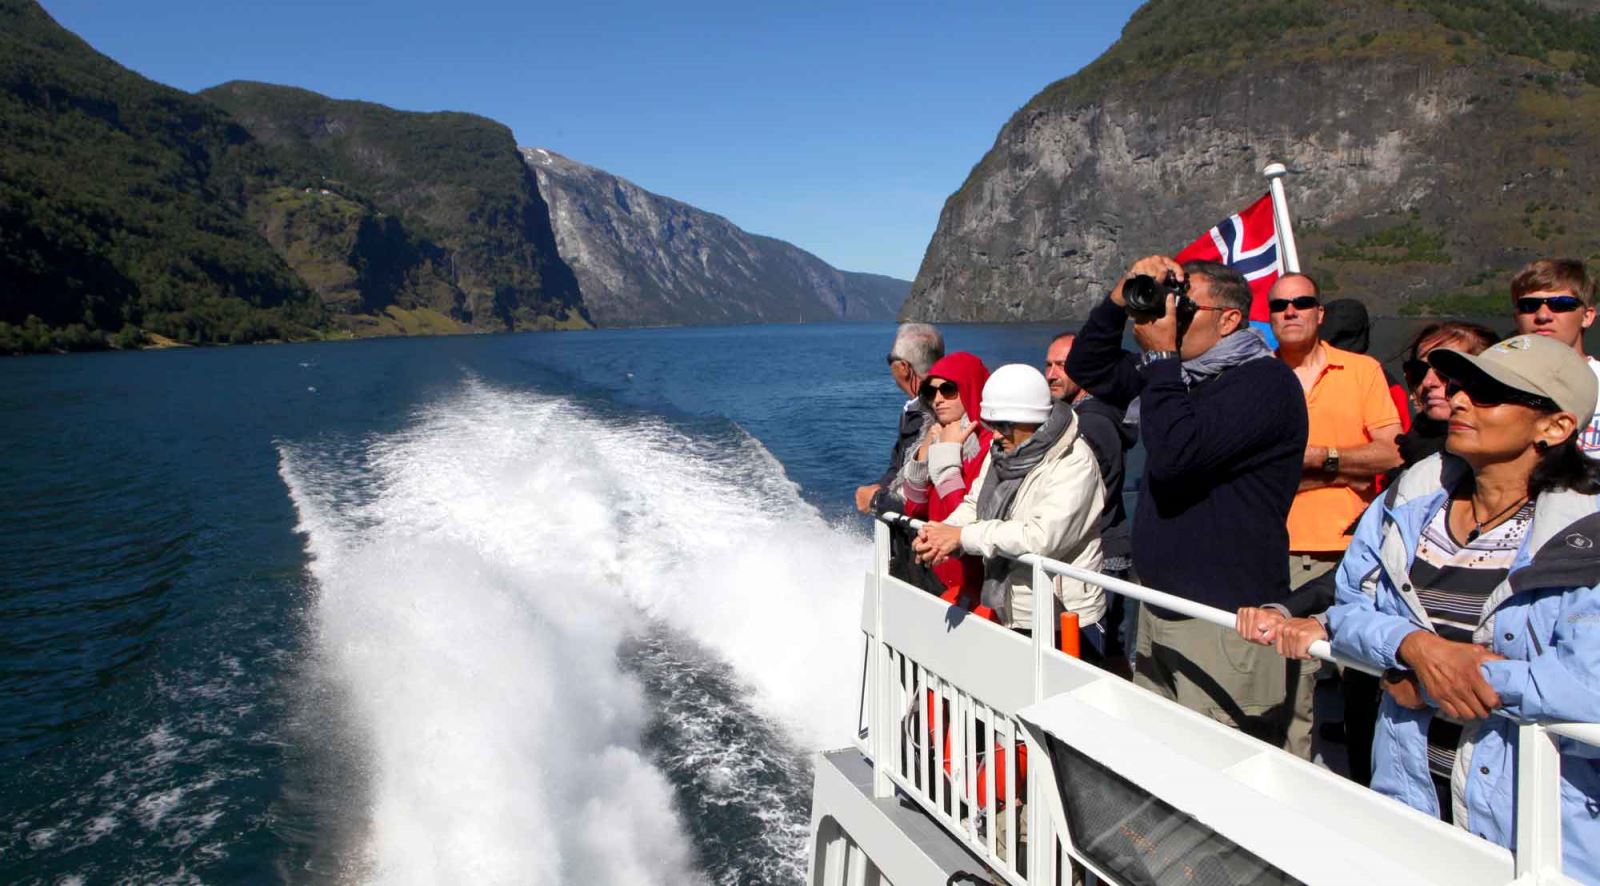 fjords cruise from bergen